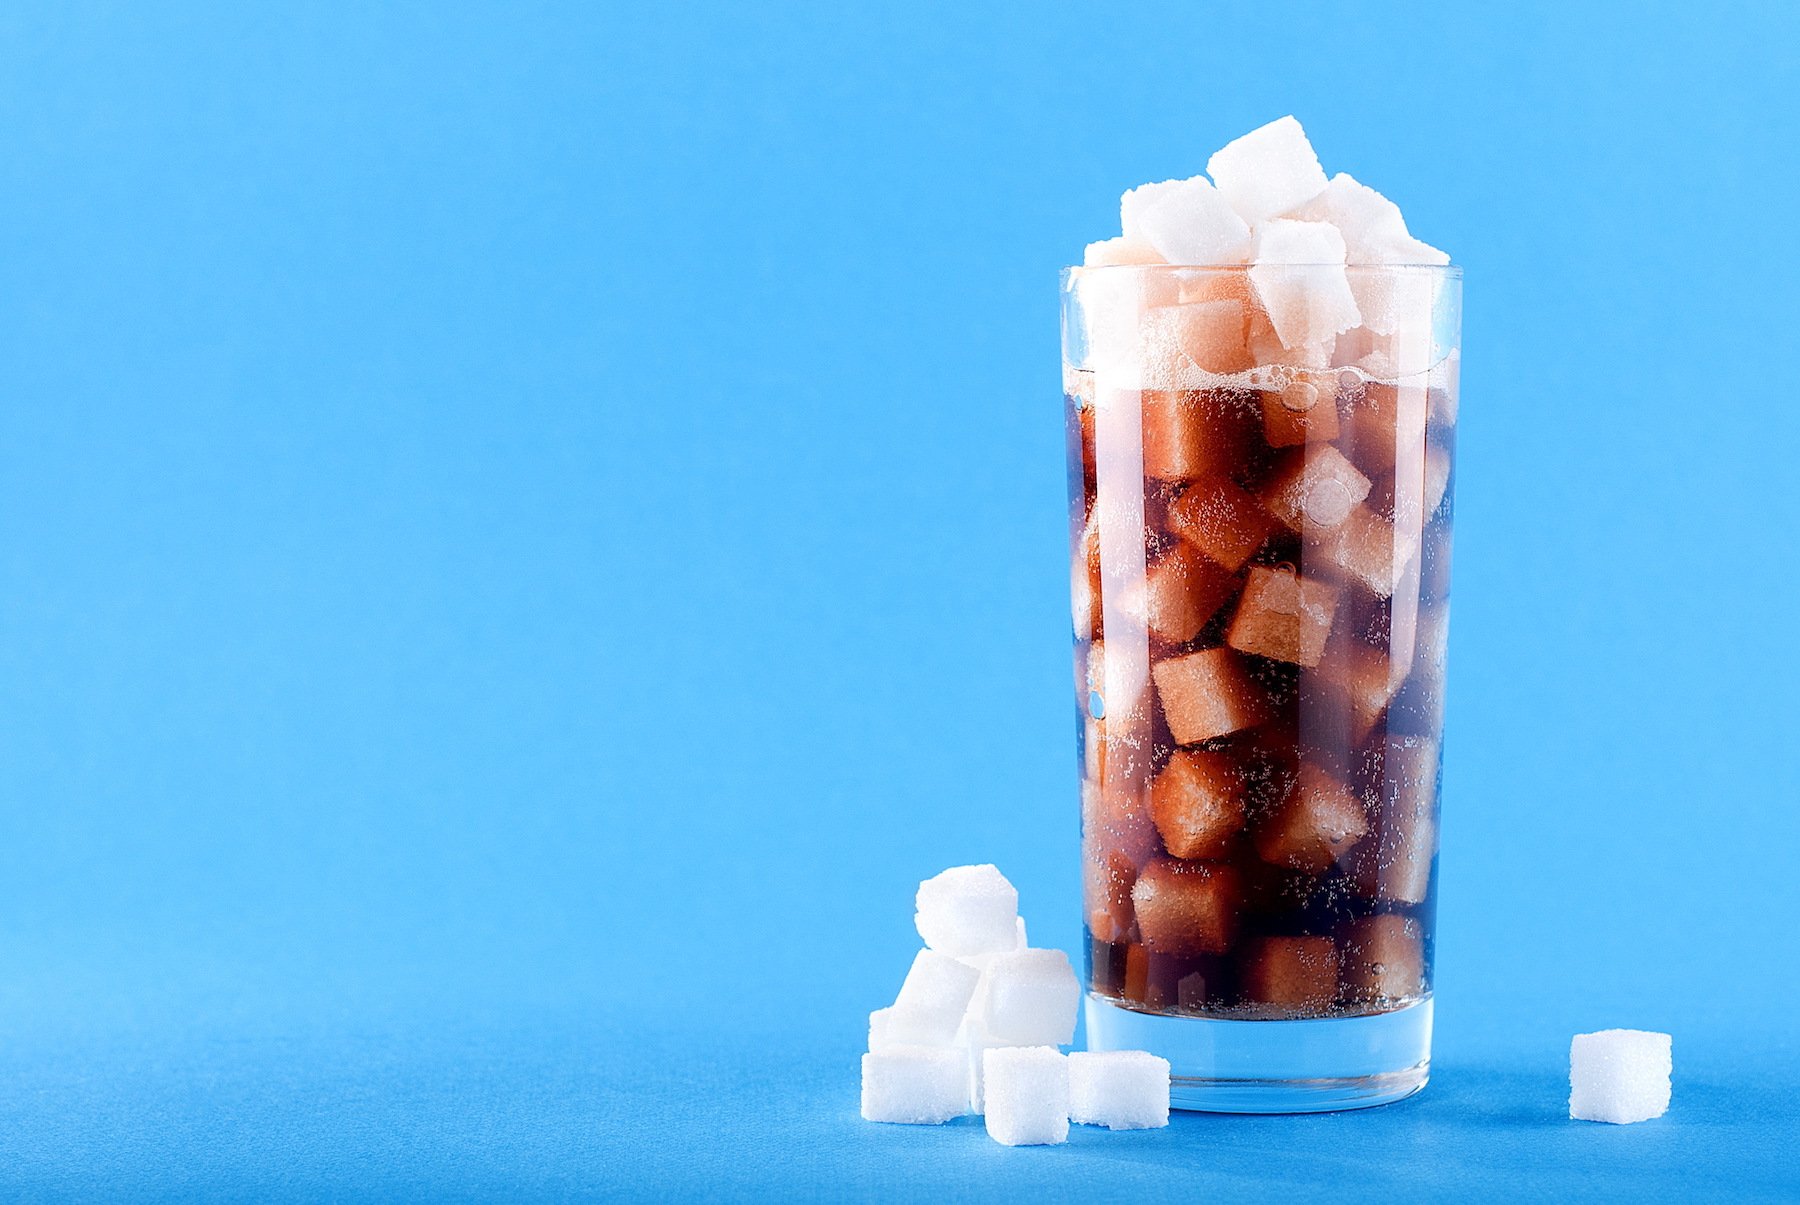 Recent research shows the dangers of sugary drinks for kids